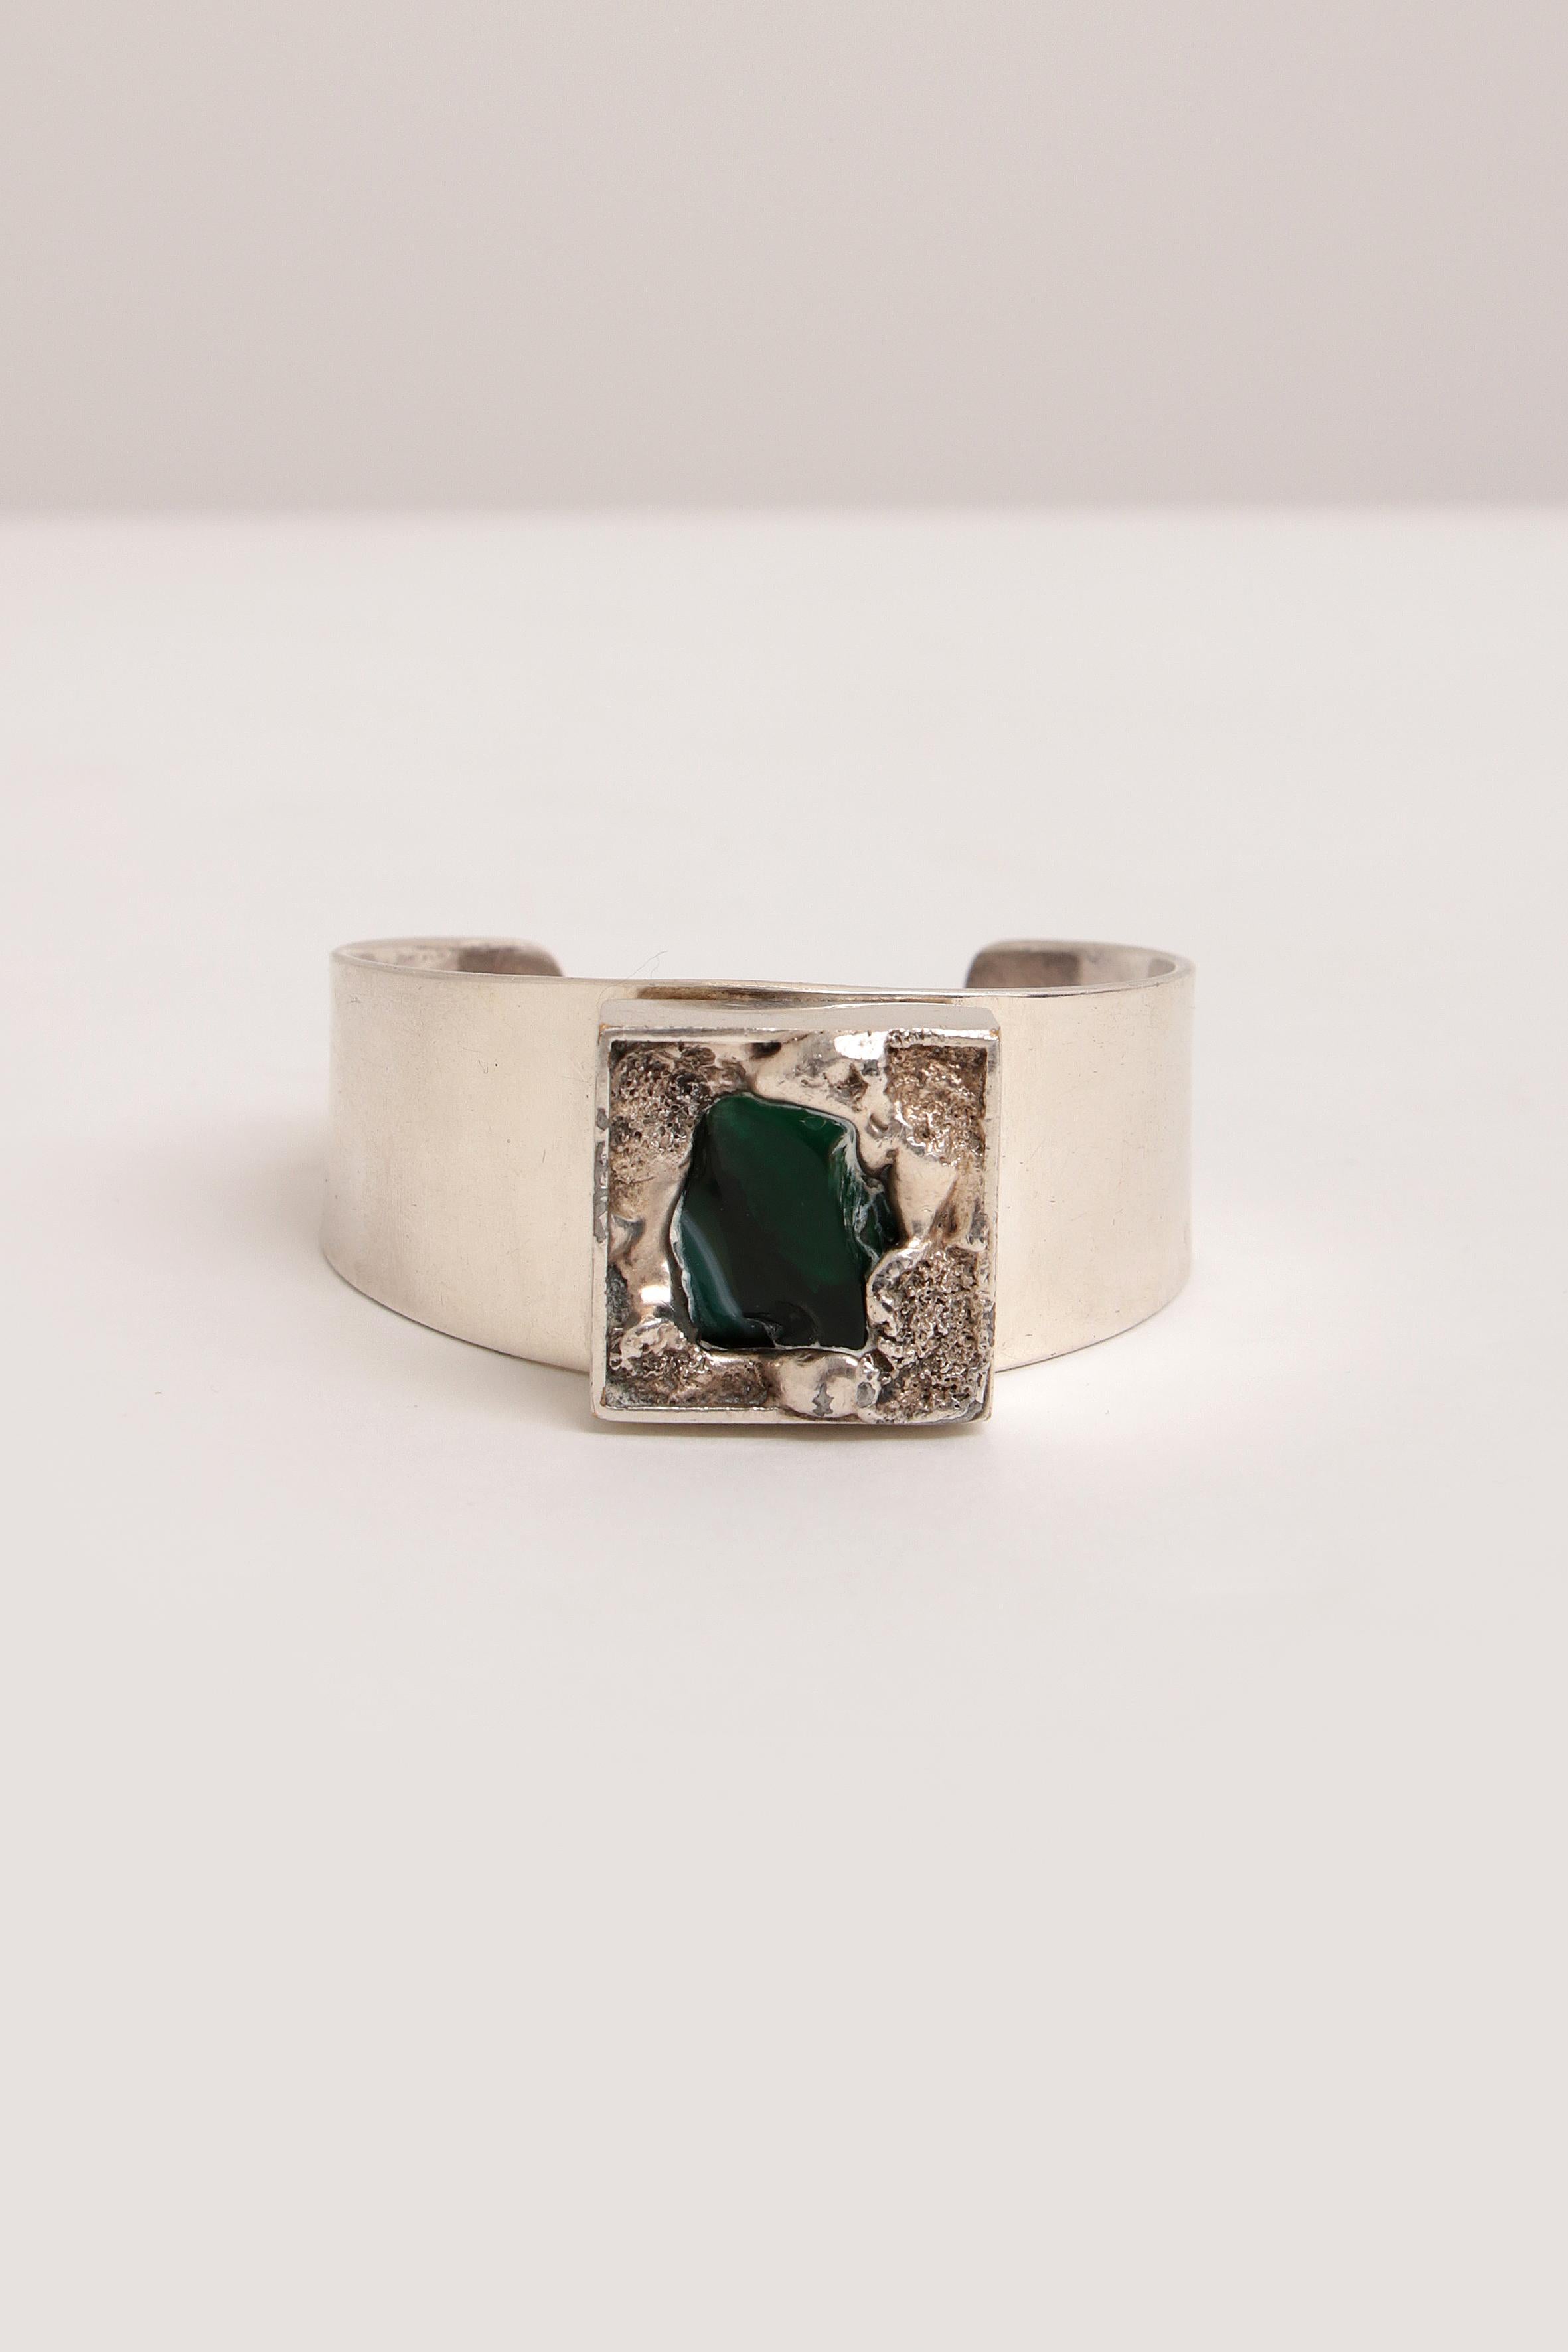 Silver-plated bracelet with glass stone by Dansk Smykkekunst, 1970 Denmark.


This Danish jewelry brand was founded in 1971 and now has one of the largest jewelry collections in Scandinavia. As you would expect from Scandinavian design, this brand